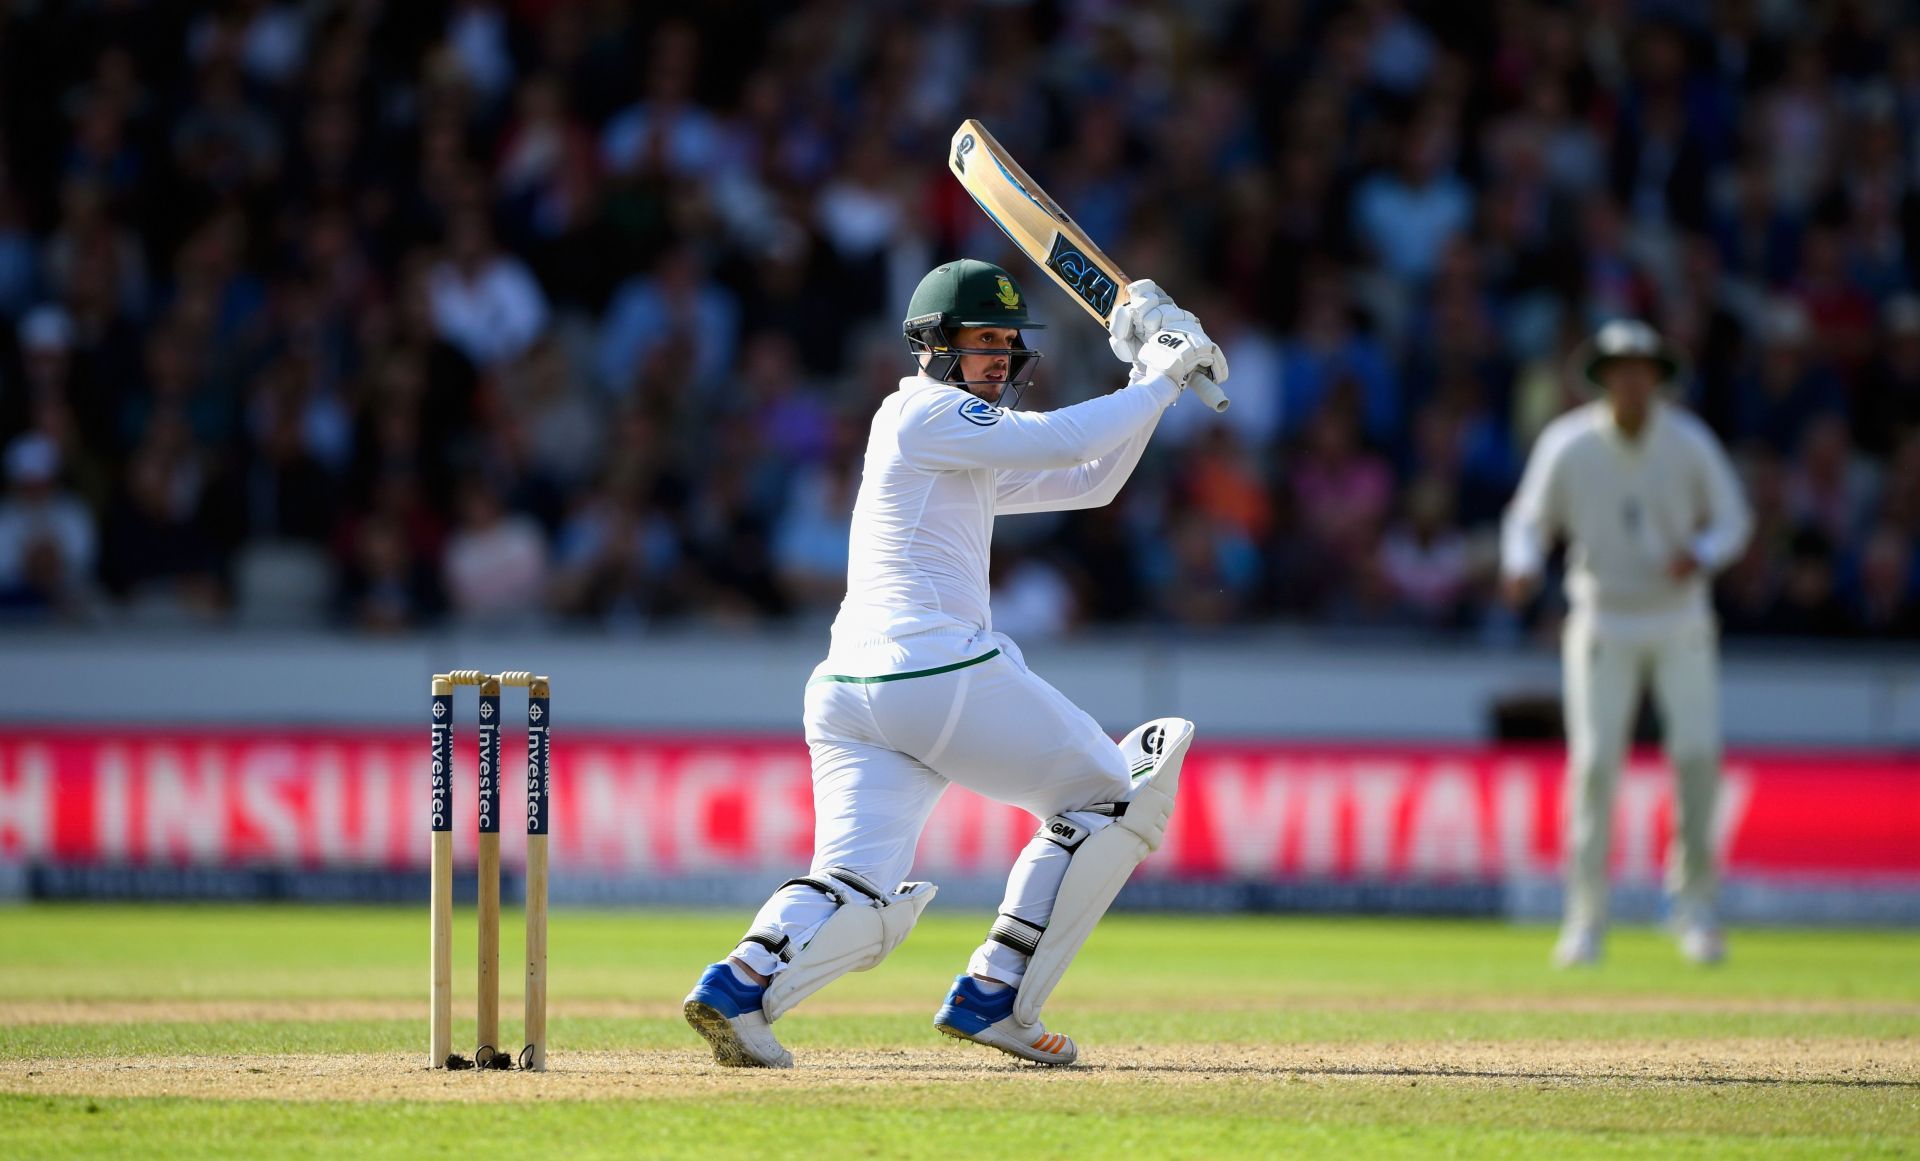 De Kock played a big role in South Africa winning the Nottingham Test in 2017